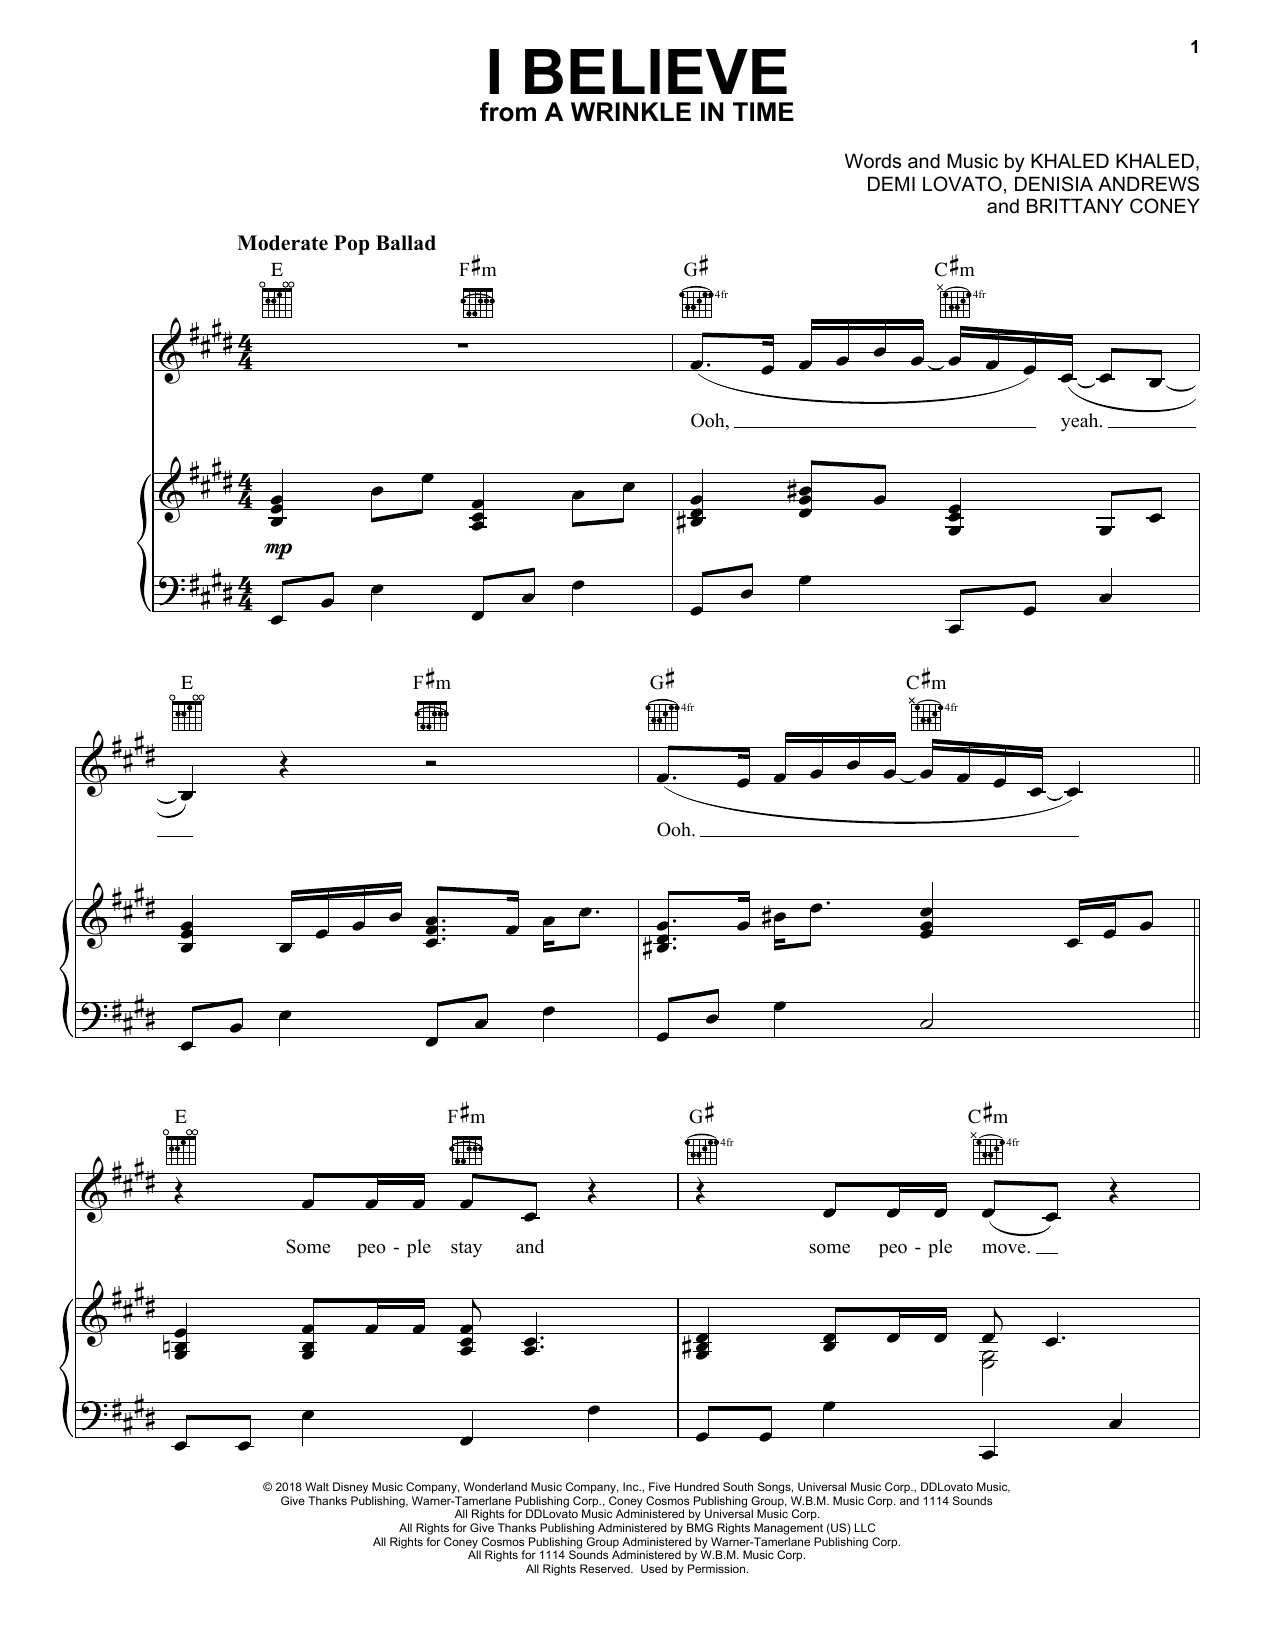 Download DJ Khaled and Demi Lovato I Believe (from A Wrinkle In Time) Sheet Music